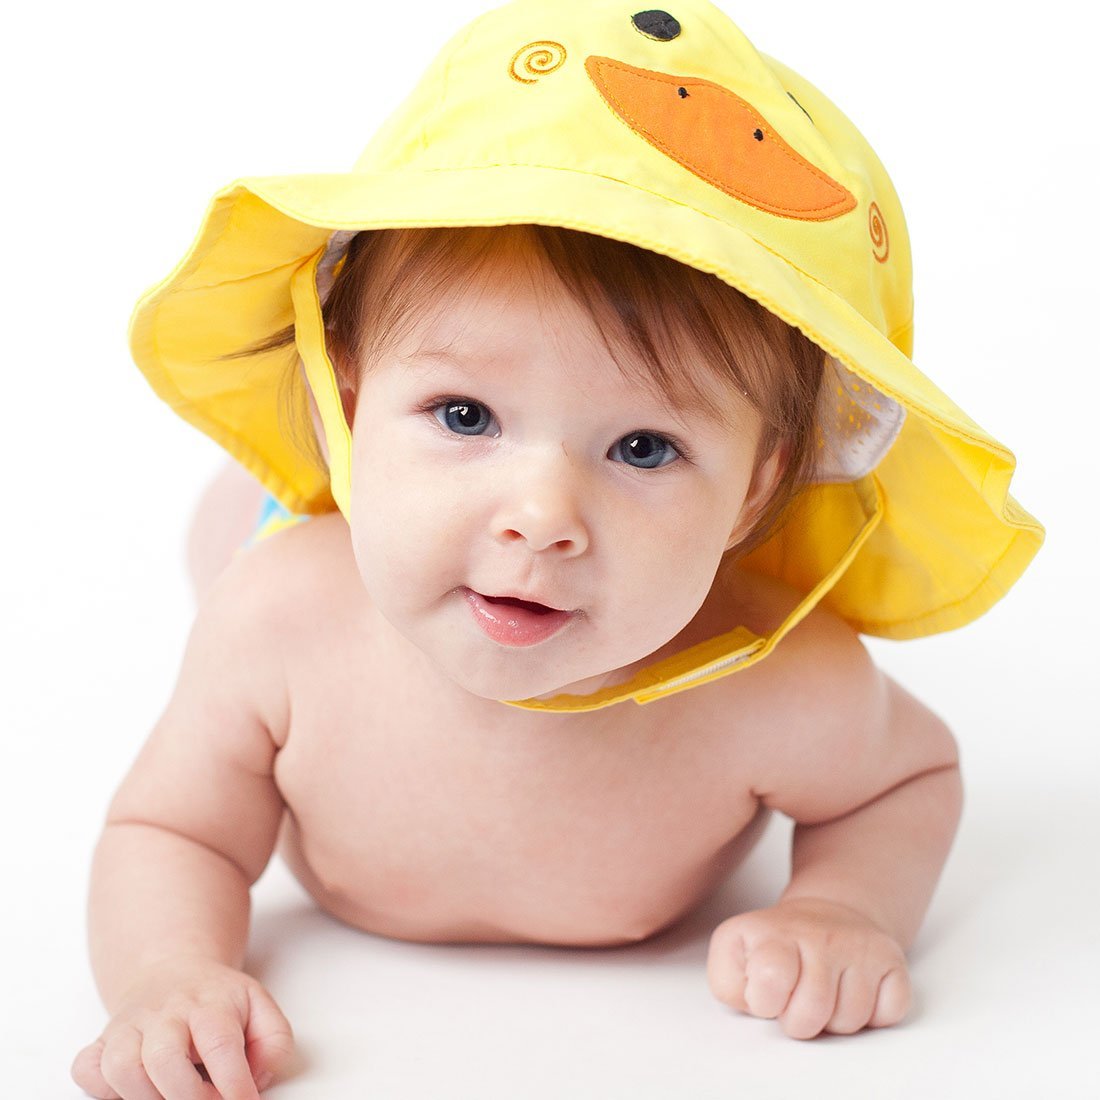 Zoocchini Baby Sunhat - Puddles the Duck